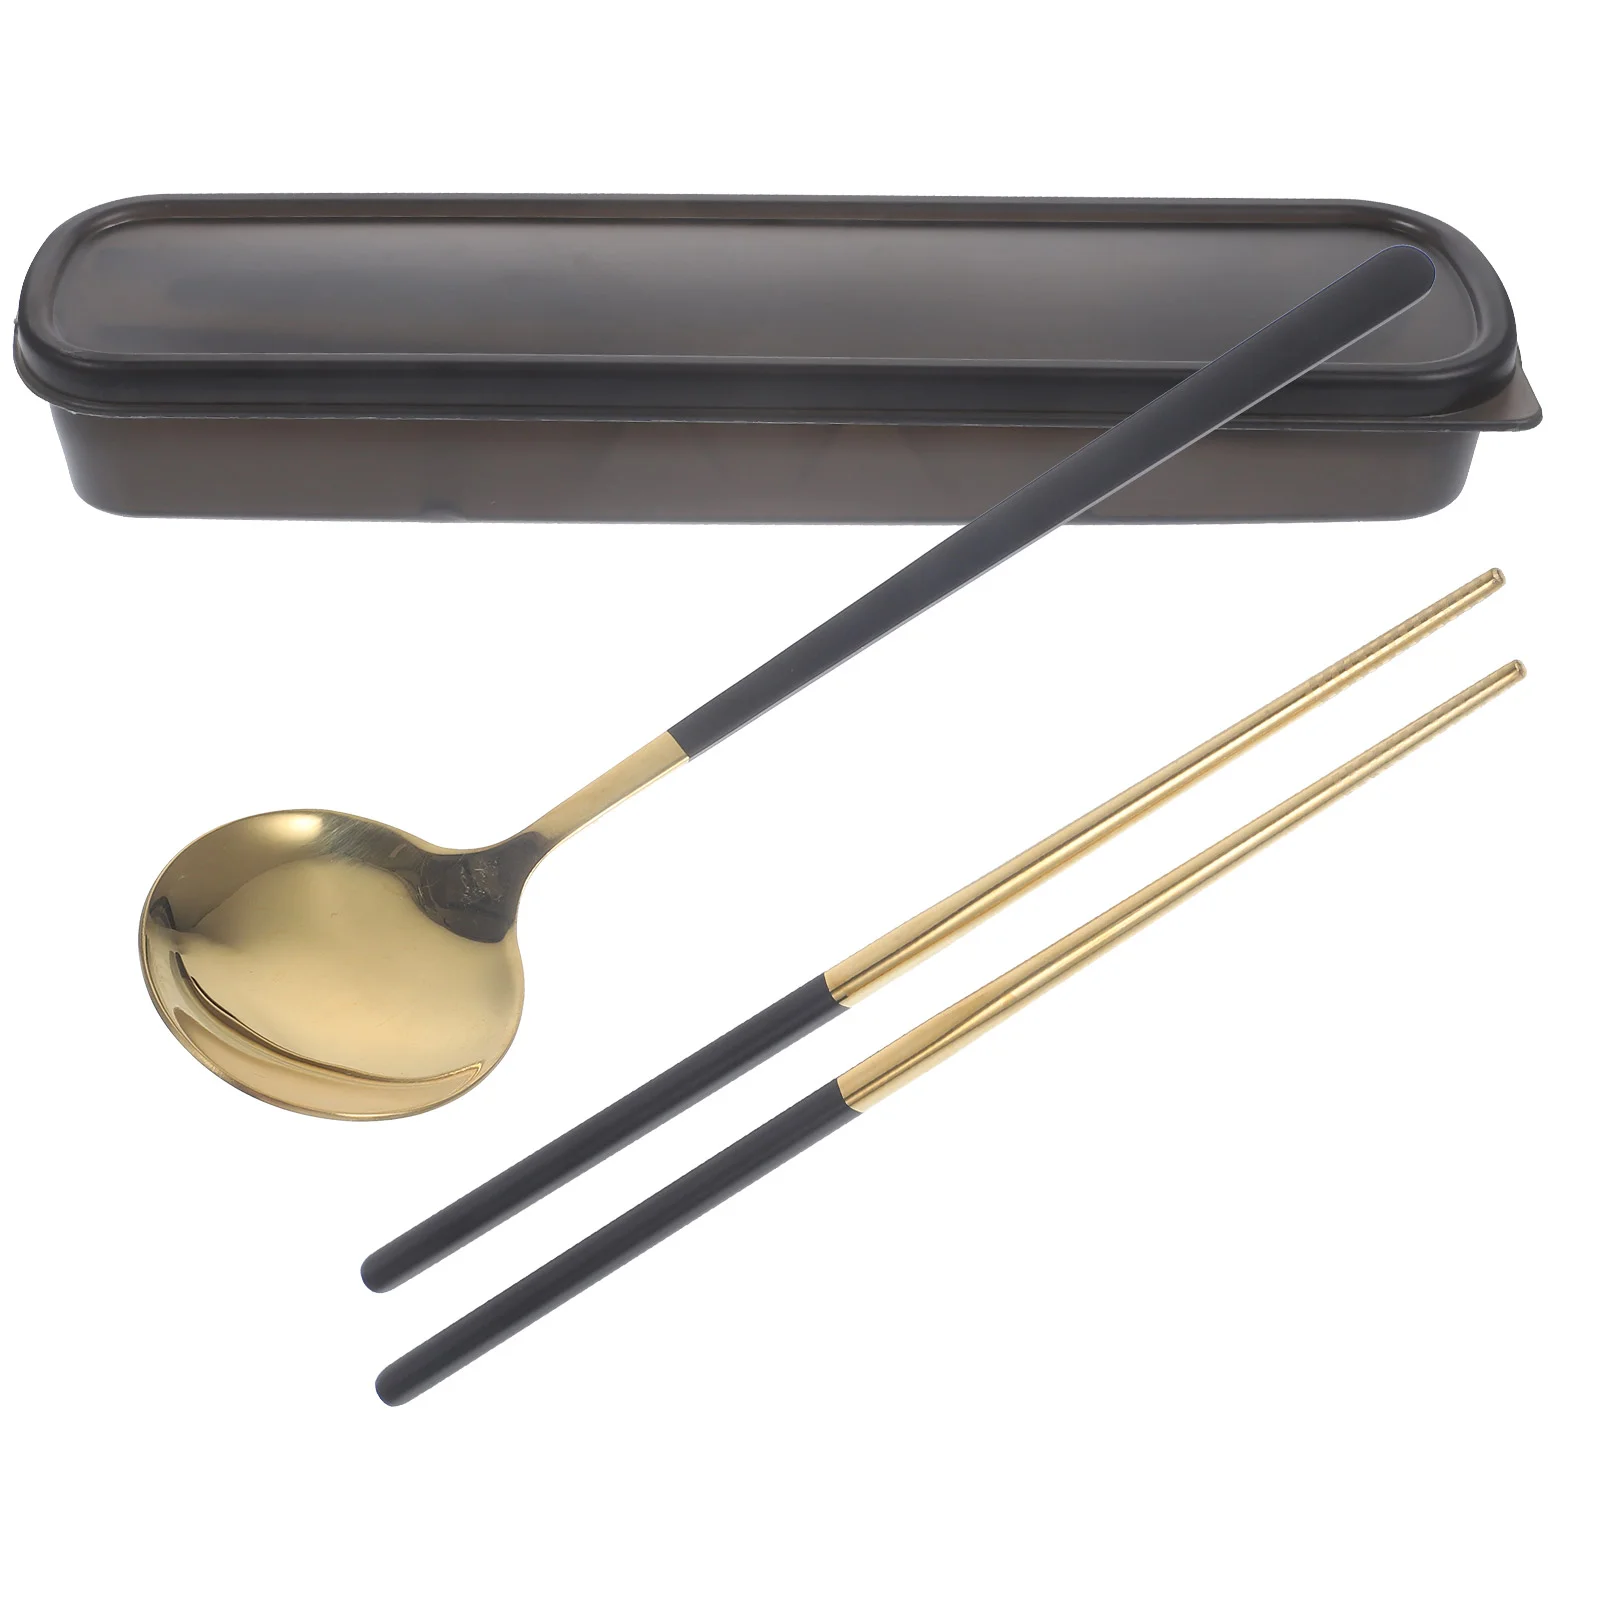 

1 Set of Spoon and Chopsticks Stainless Steel Tableware Dinner Cutlery with Storage Box